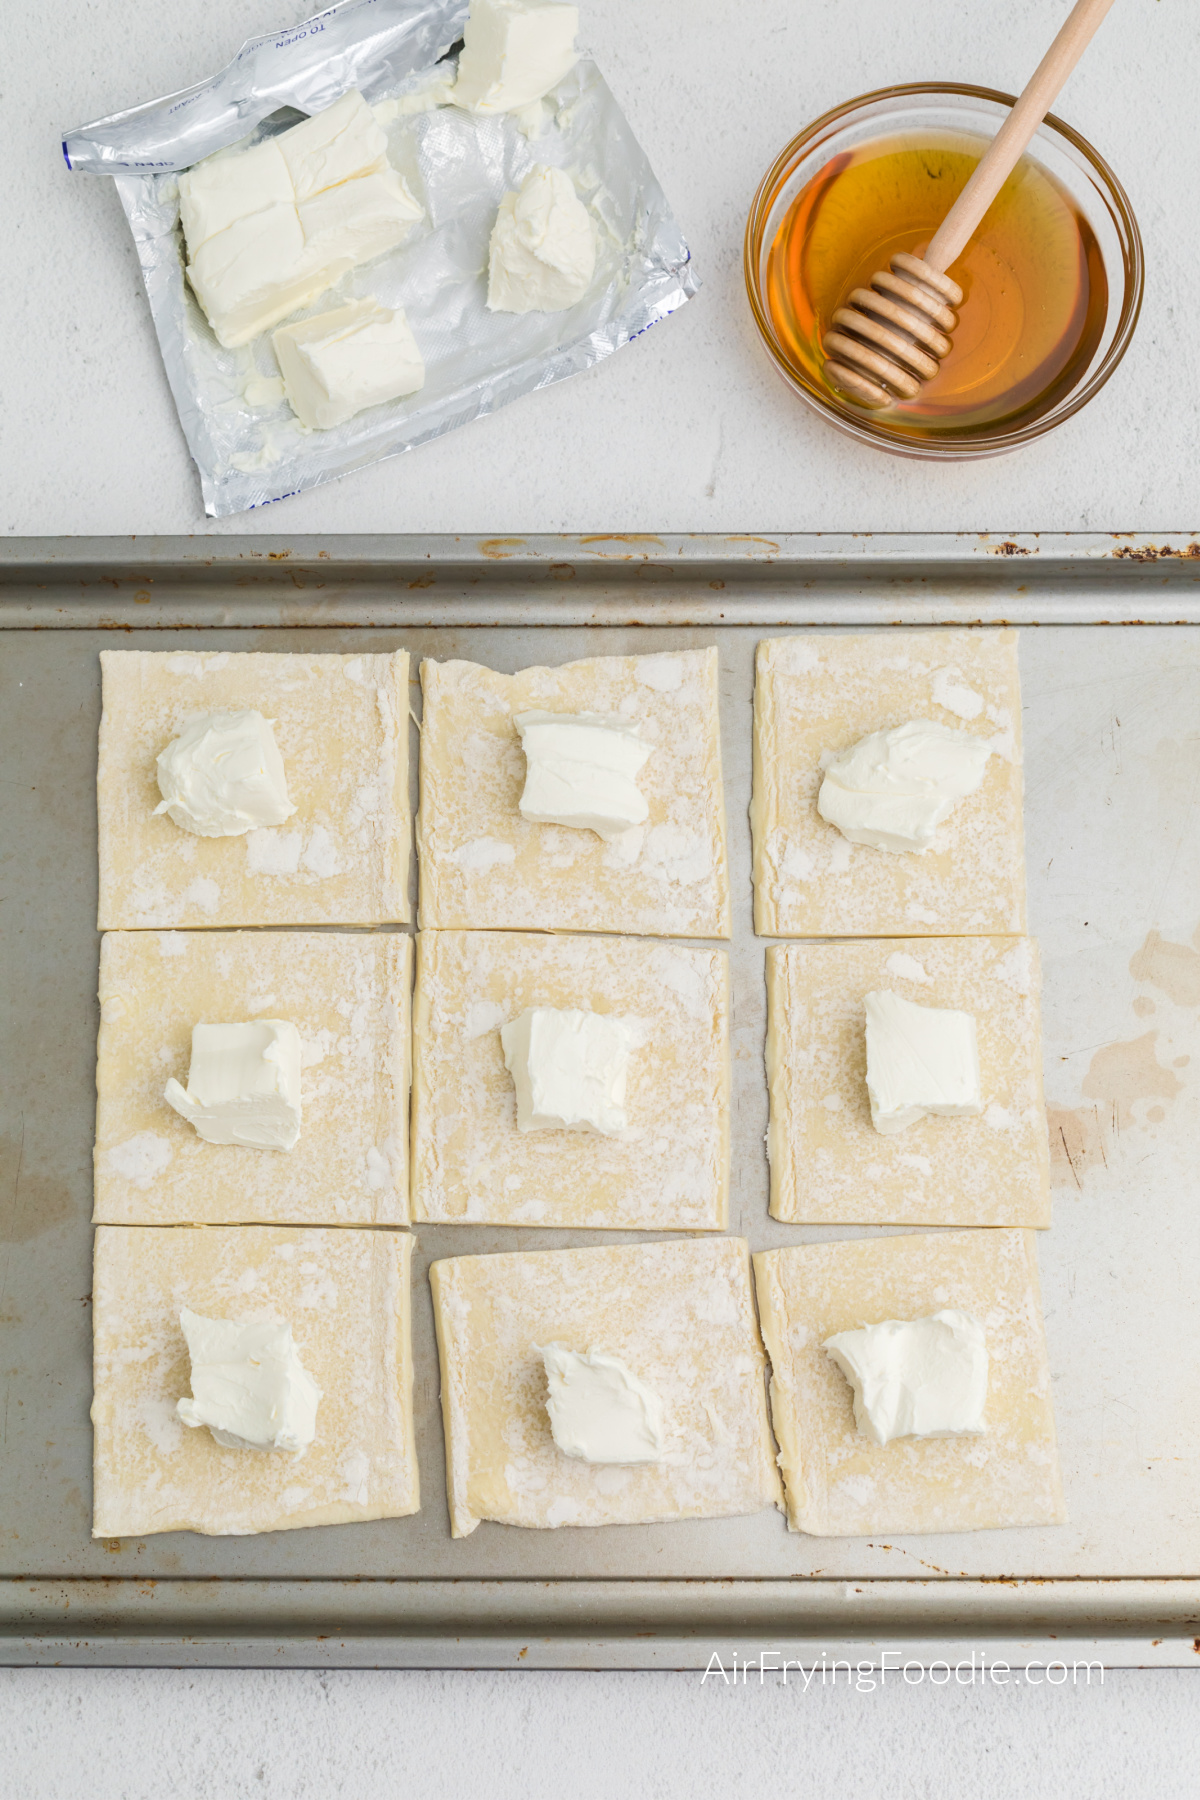 Cream cheese places into the middle of the puff pastry squares.